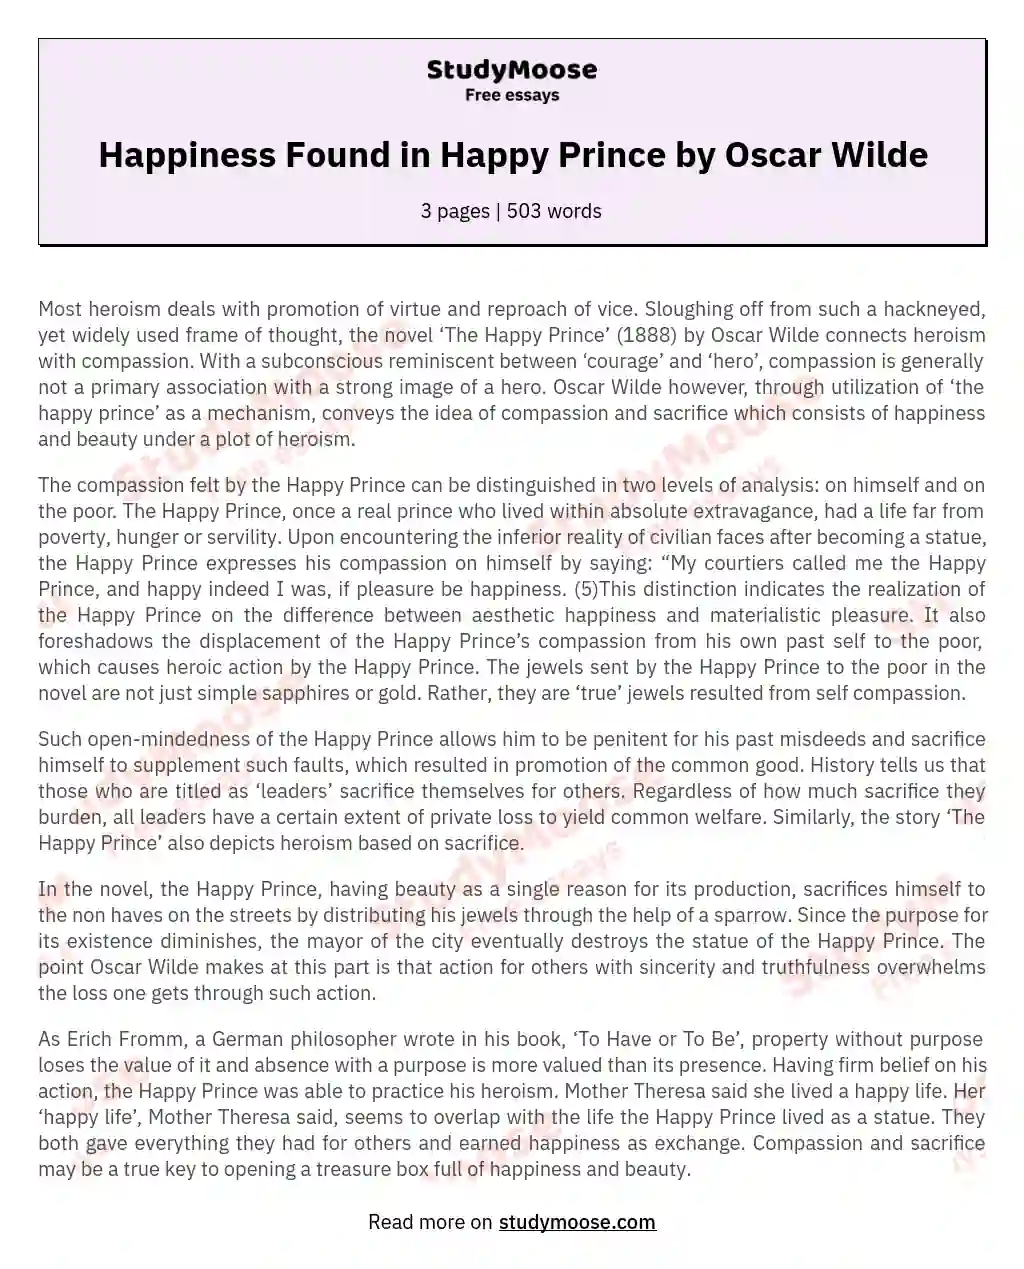 Happiness Found in Happy Prince by Oscar Wilde essay